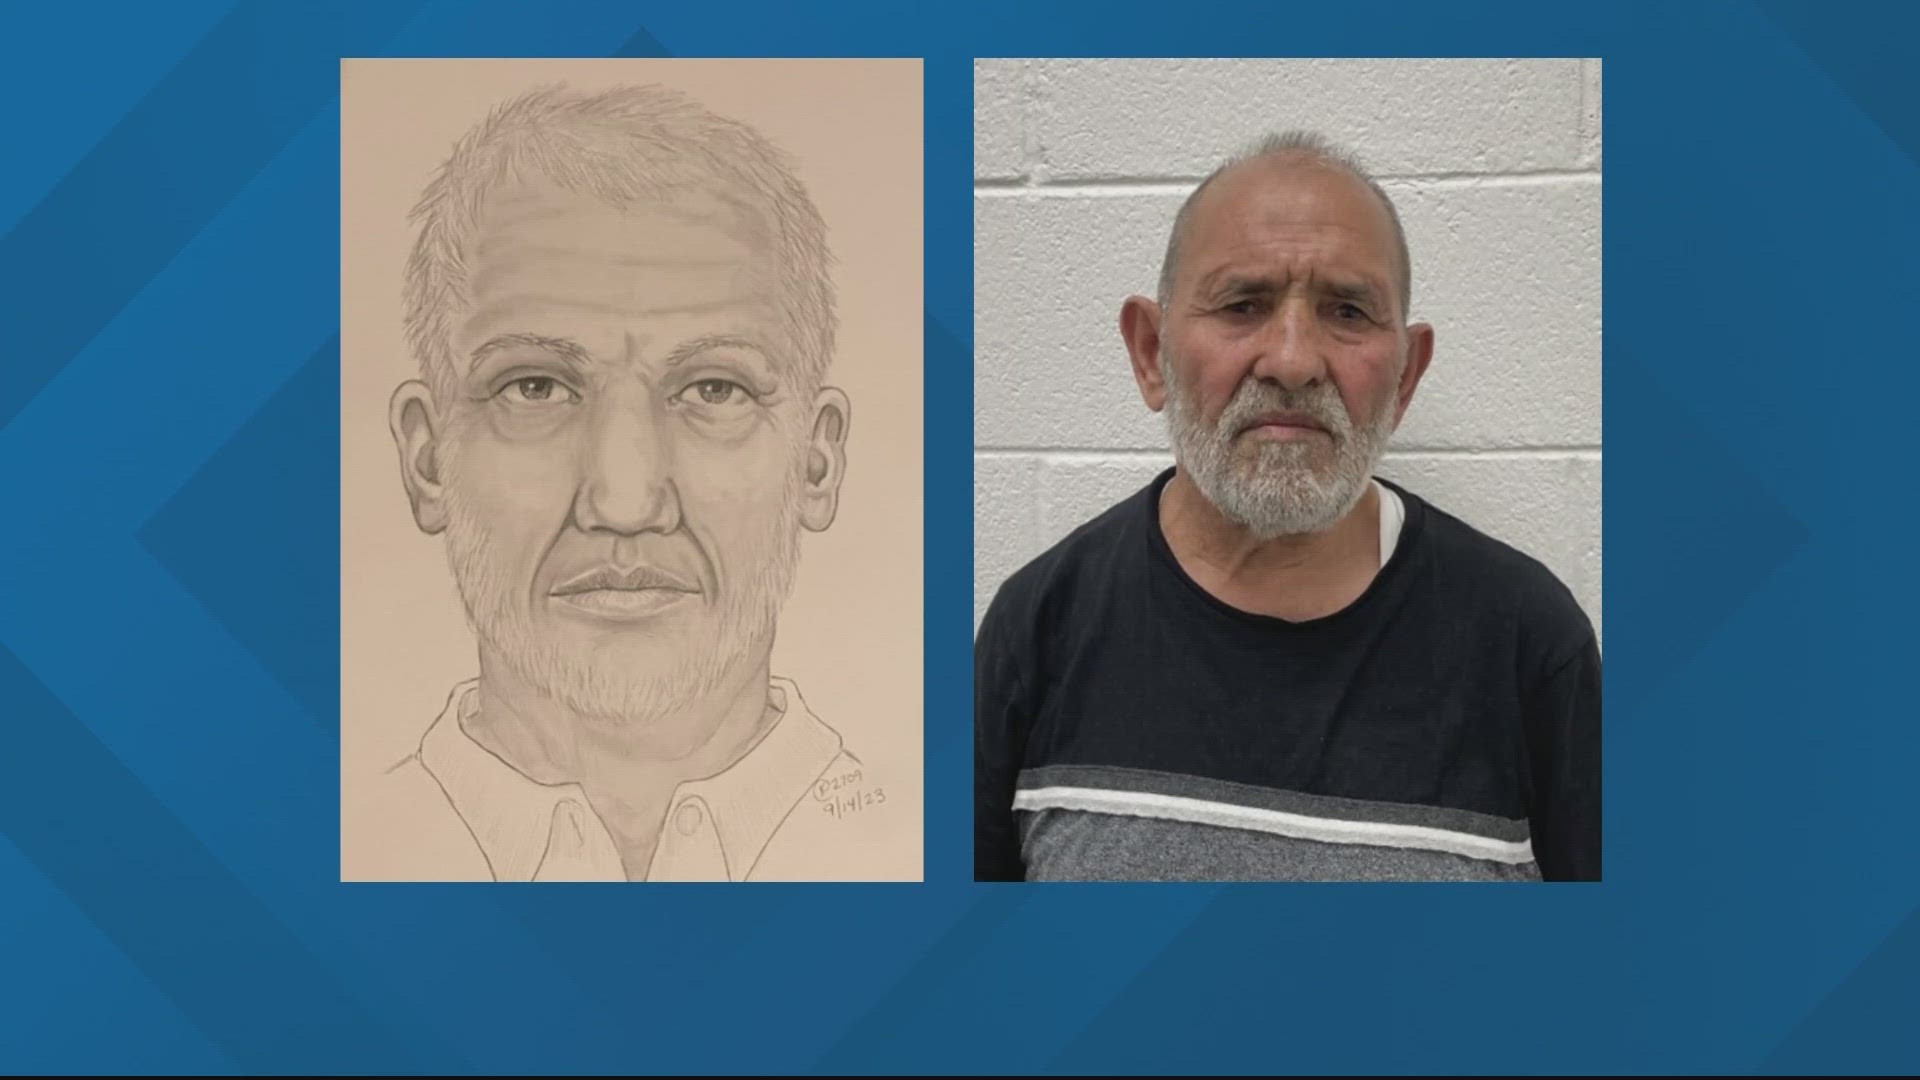 Police arrested a 65-year-old man who they say groped at least two juveniles in the Burke area, the West Springfield Police District said Monday.